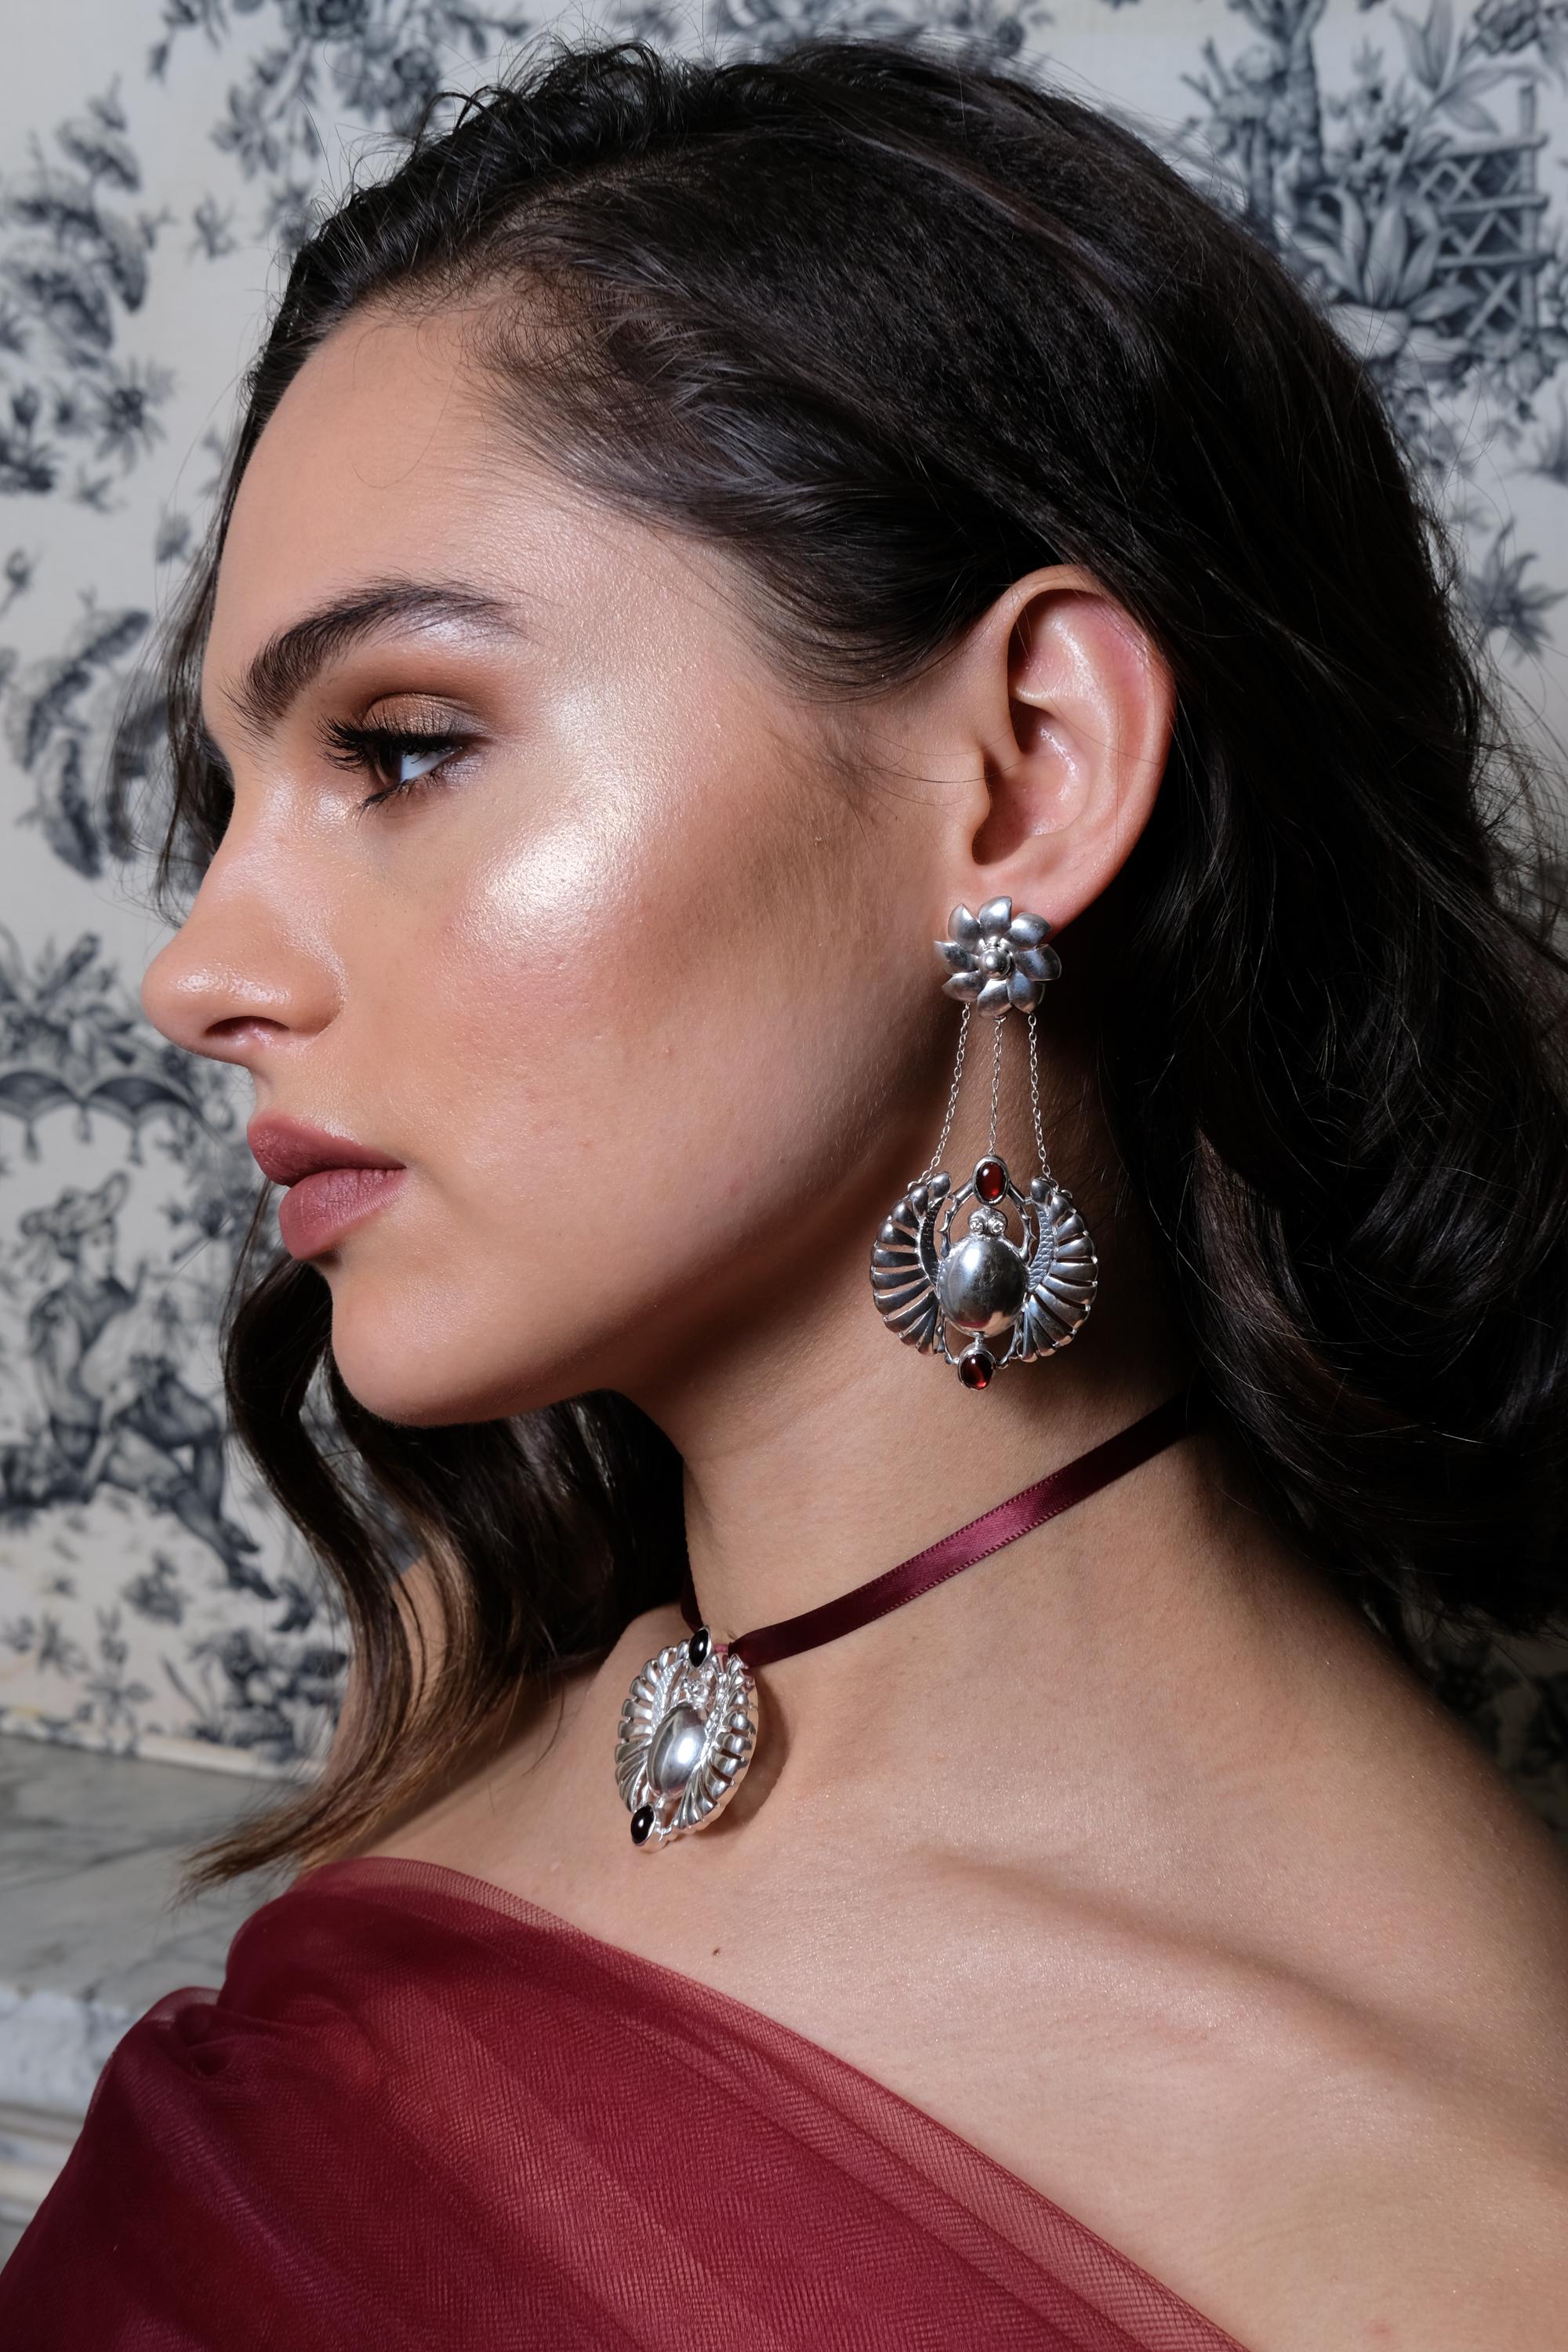 This choker necklace features the open winged scarab talisman of the season set on a silk satin ribbon.  In Sterling silver or yellow gold vermeil, this is surely classic and timeless yet contemporary in style. Stones are cabernet red garnets or